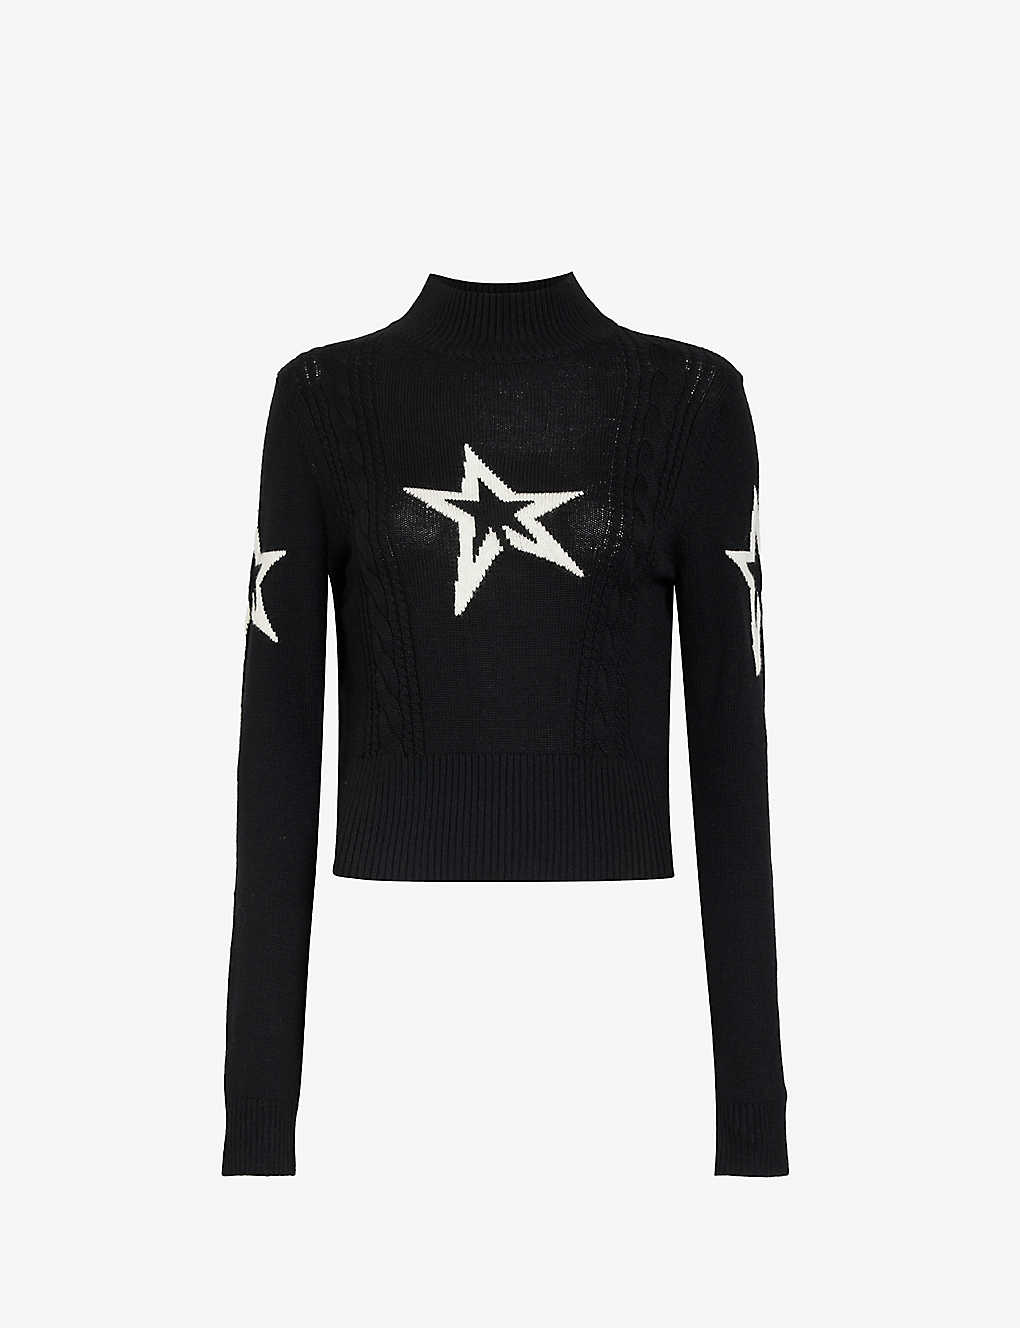 Shop Perfect Moment Women's Black Star-pattern High-neck Wool Knitted Jumper